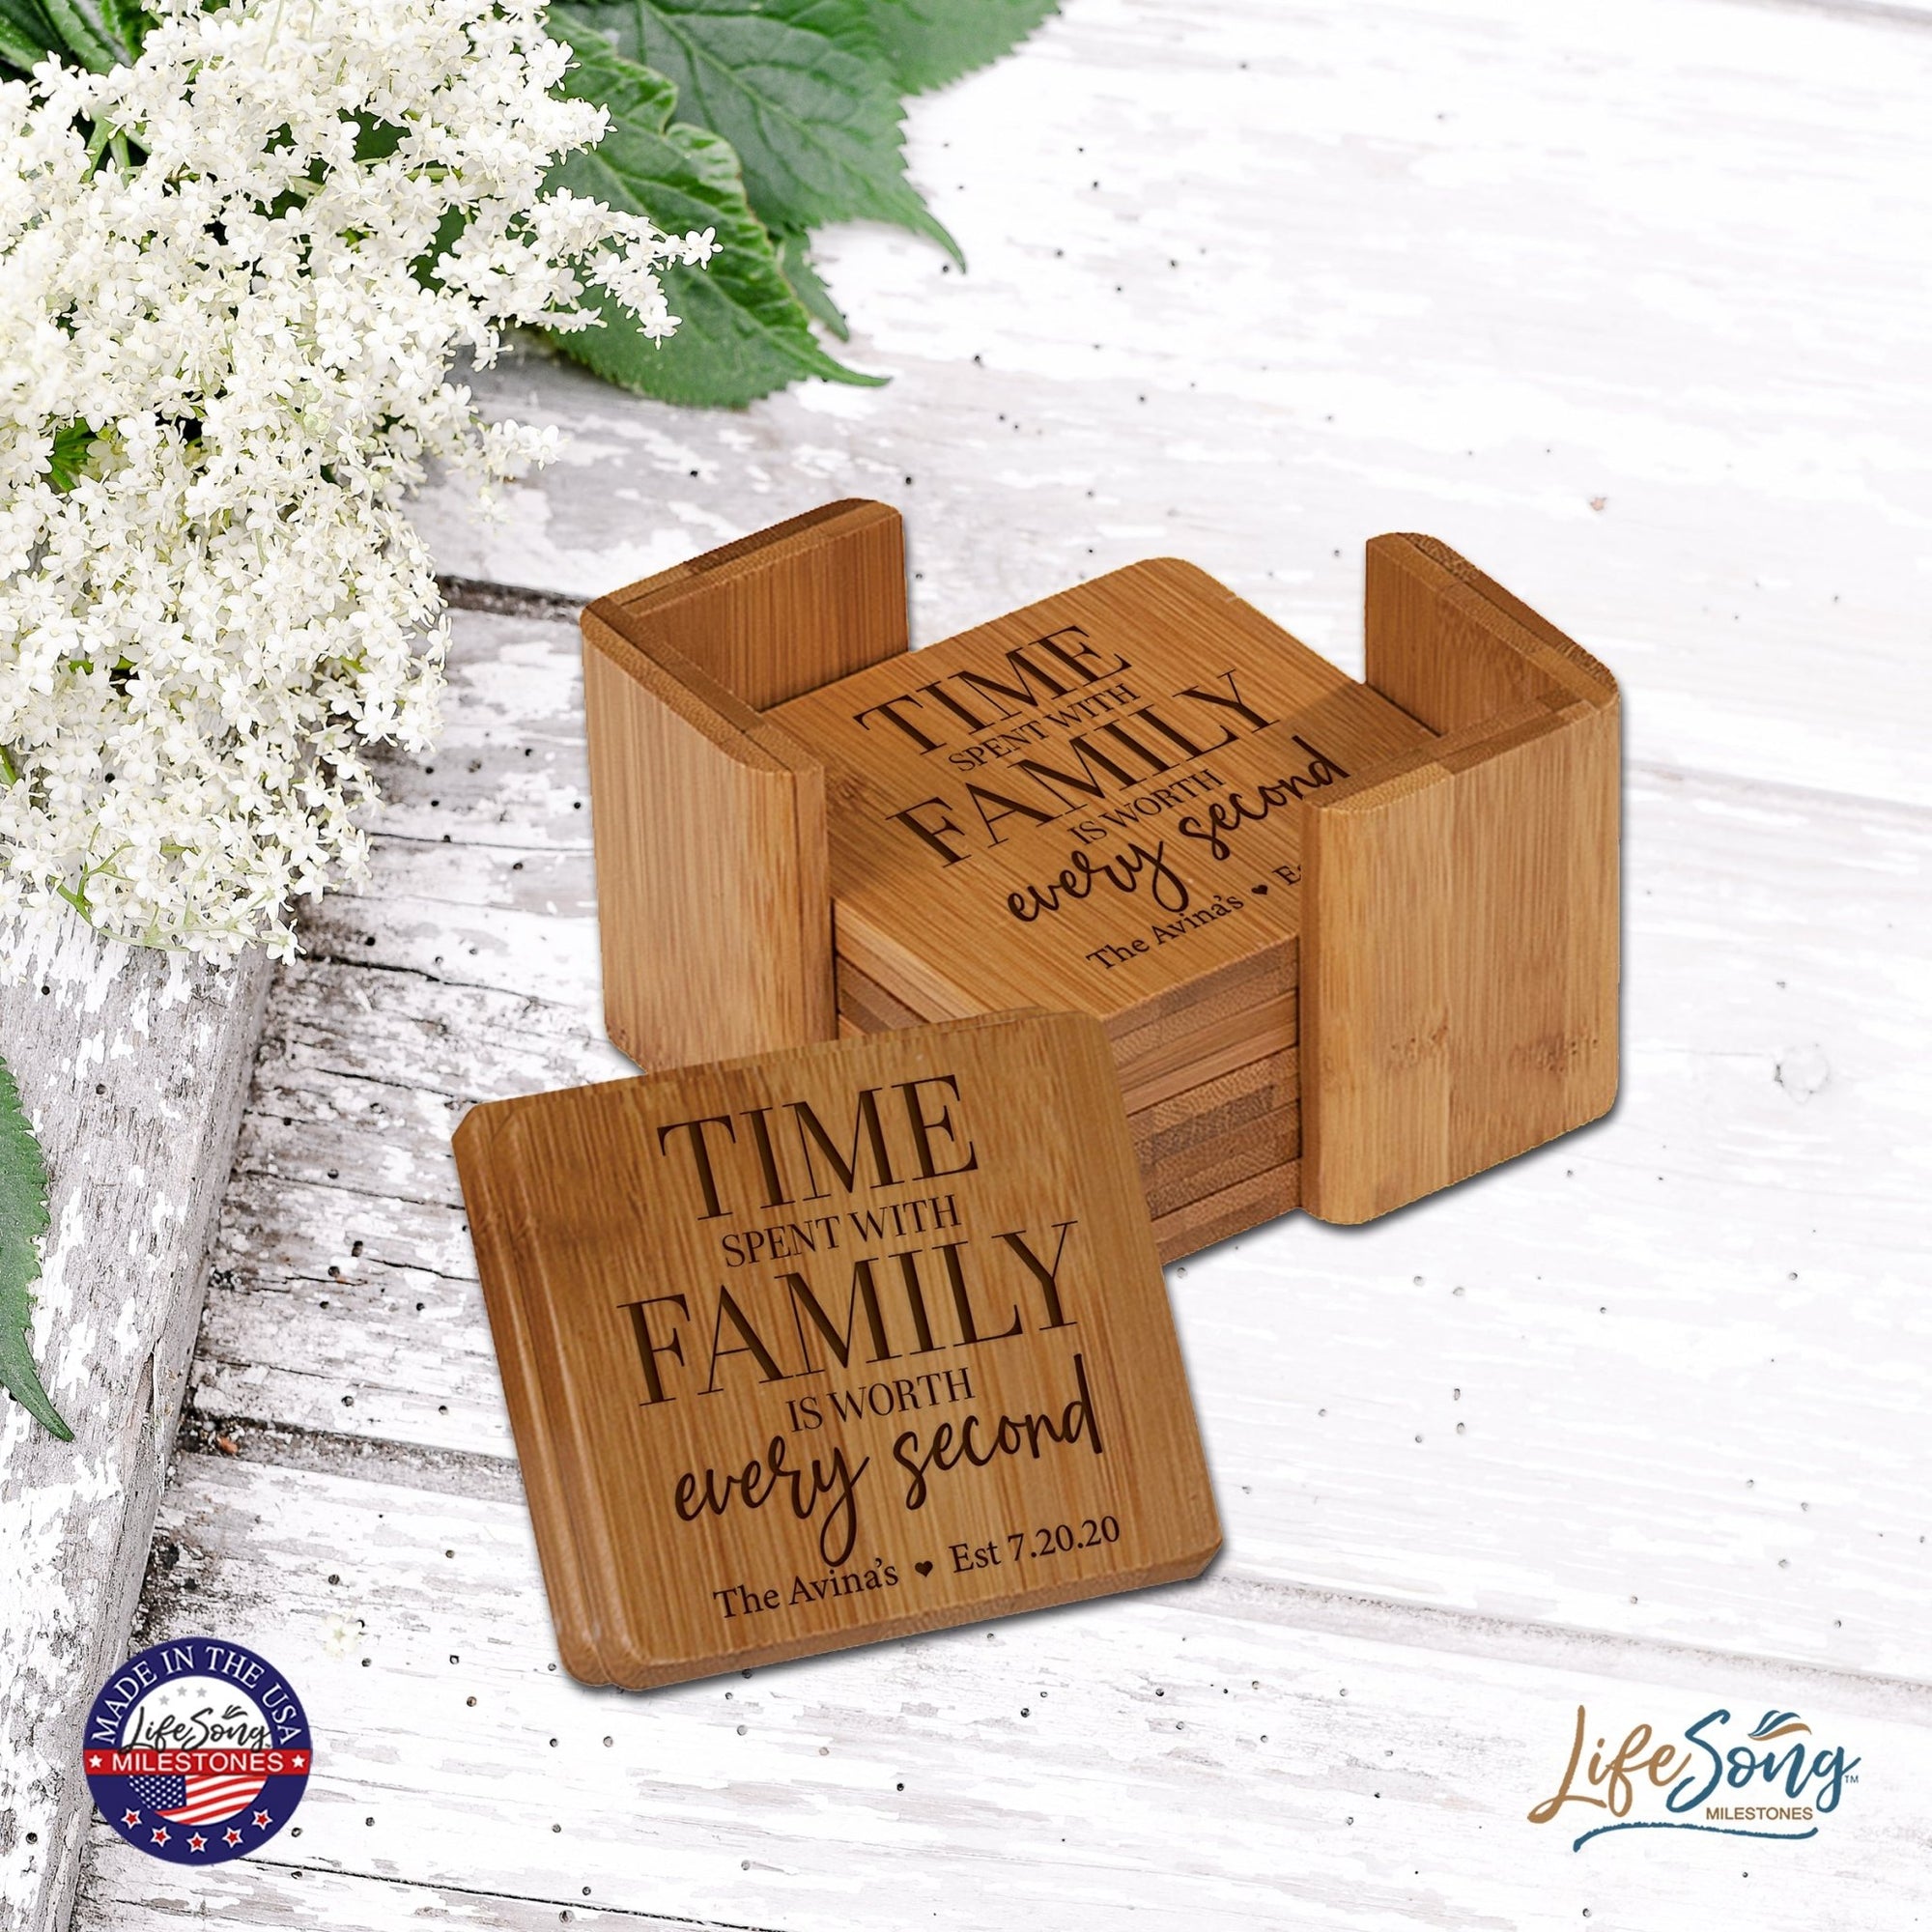 Personalized Family Home 6pc Solid Bamboo Coaster Set With Holder 4.5x4.5 – Time Spent With - LifeSong Milestones